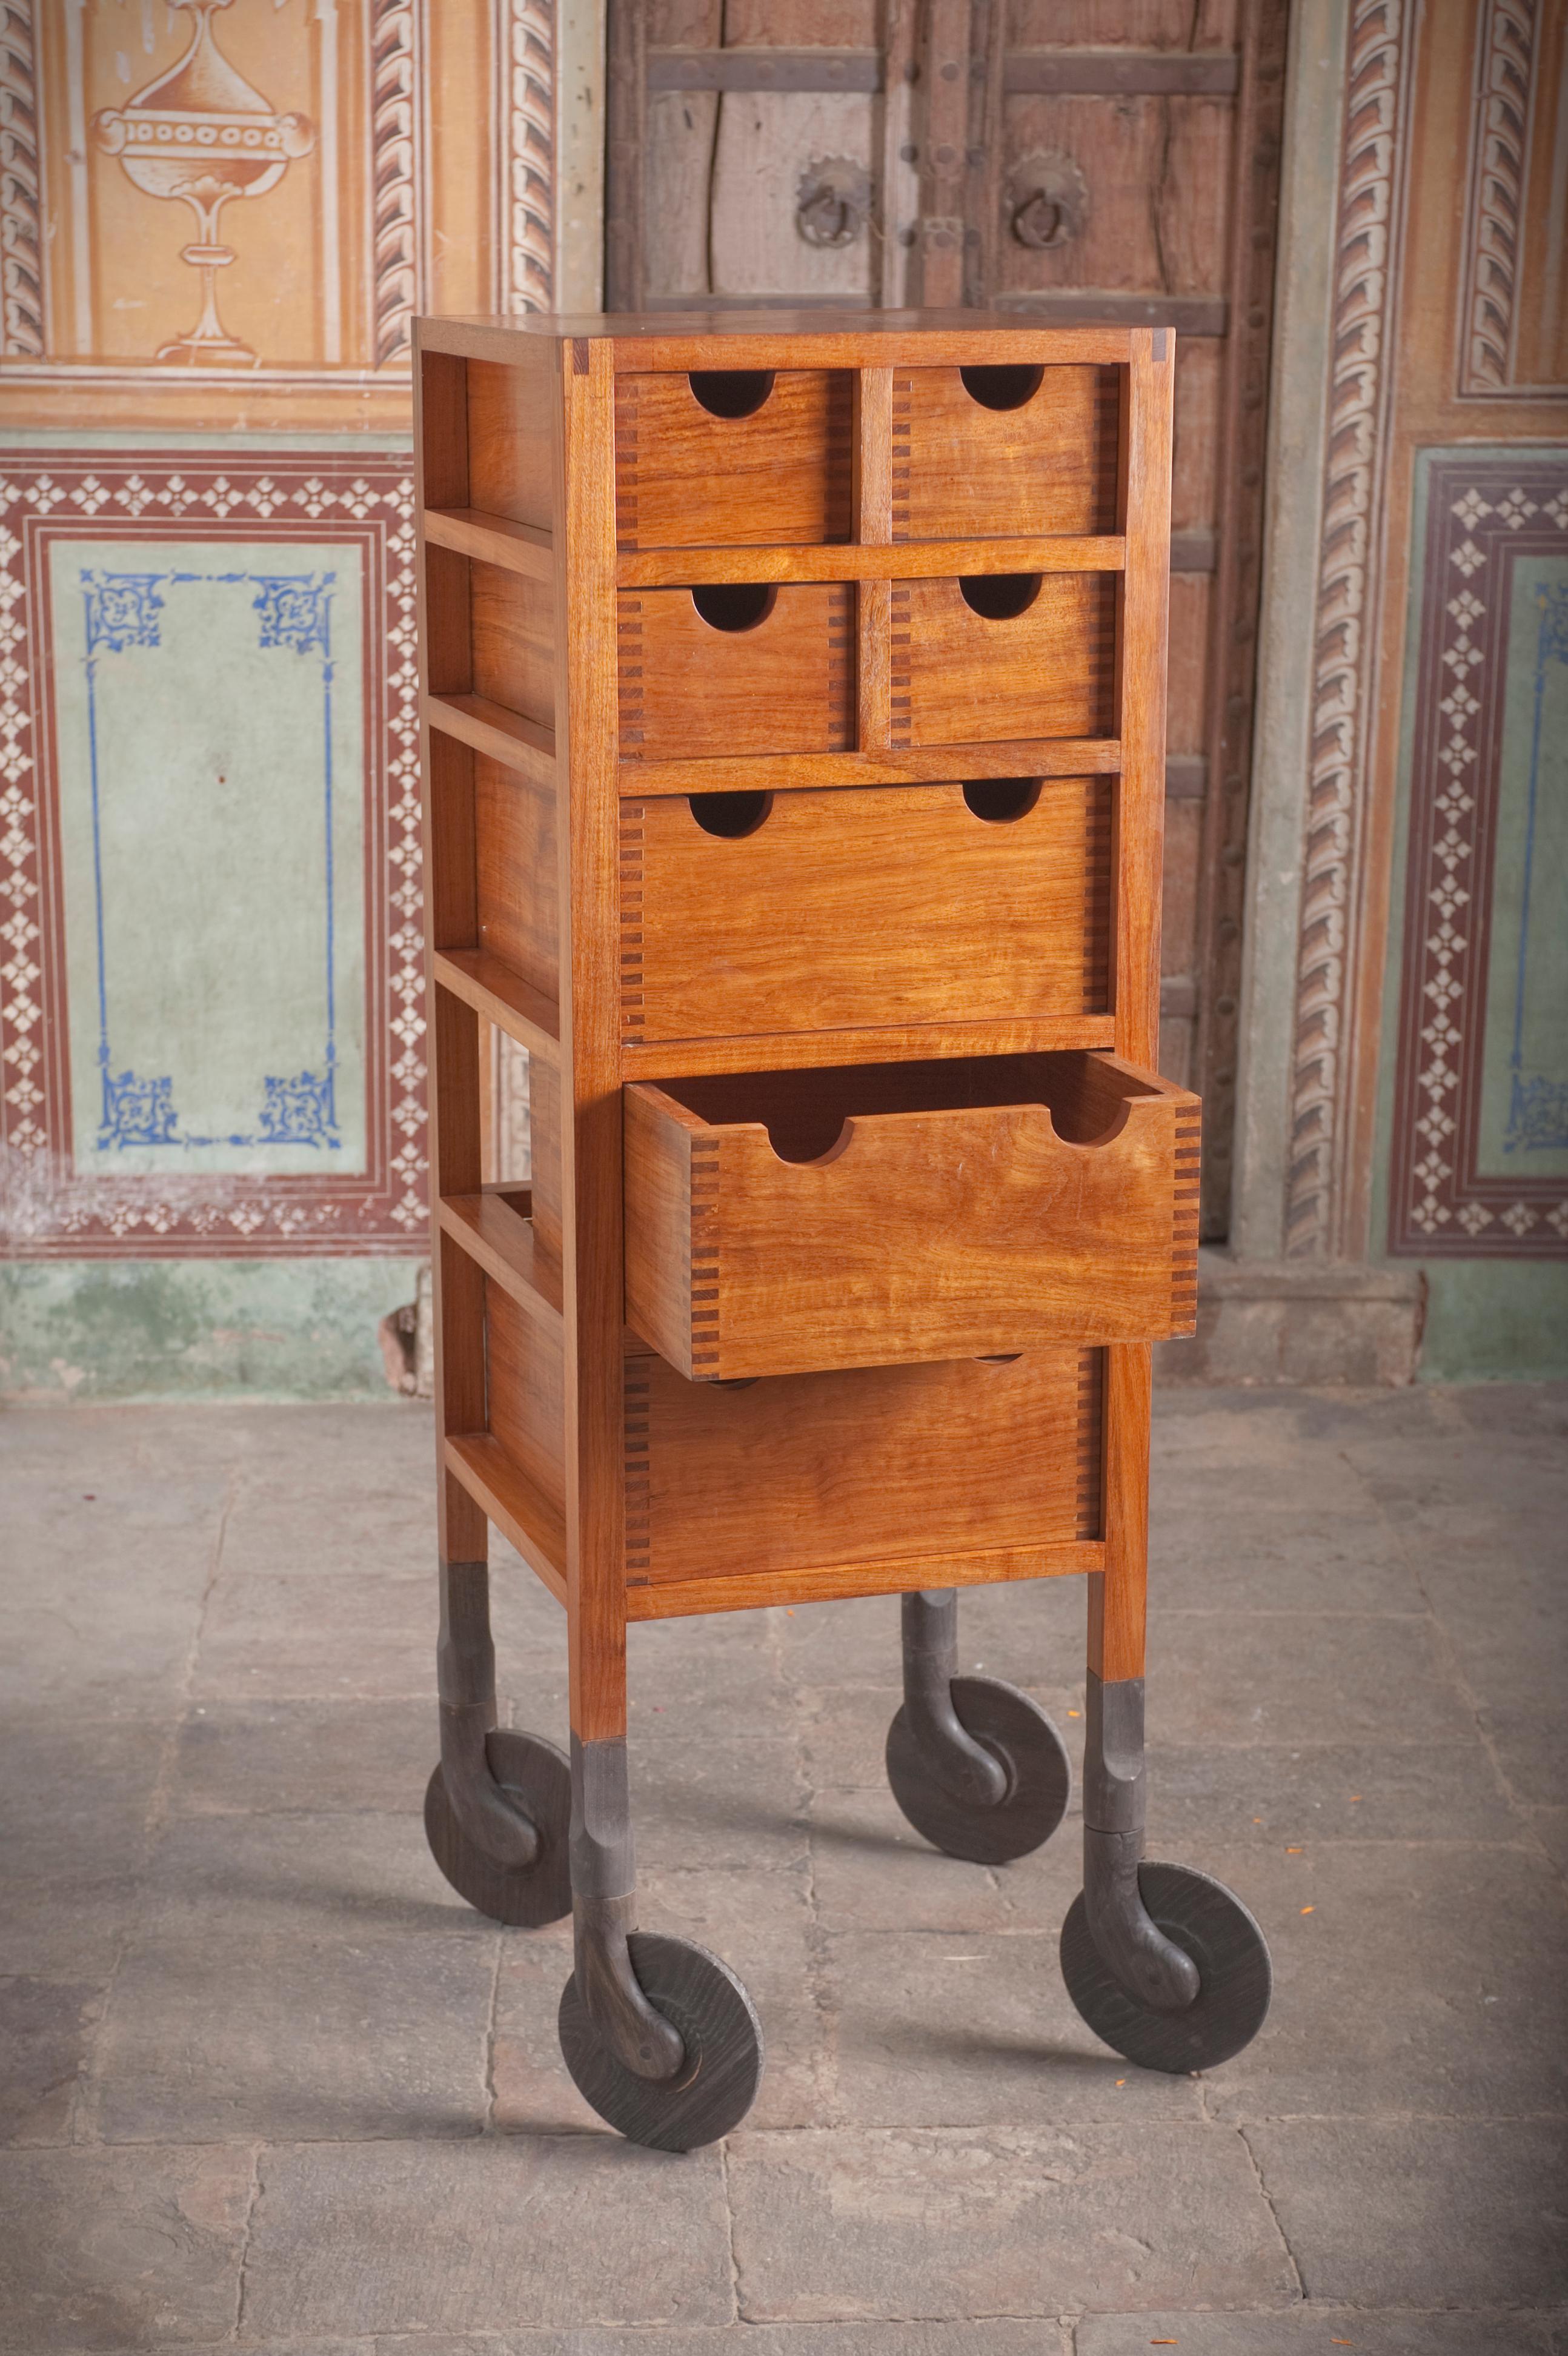 Built entirely of solid wood, the Shaker-influenced Rolling Dresser features open-frame construction and hand-carved, swiveling solid wood casters. No metal fastener is used. Even the axle that the wooden wheels turn on is hardwood. Three full-width